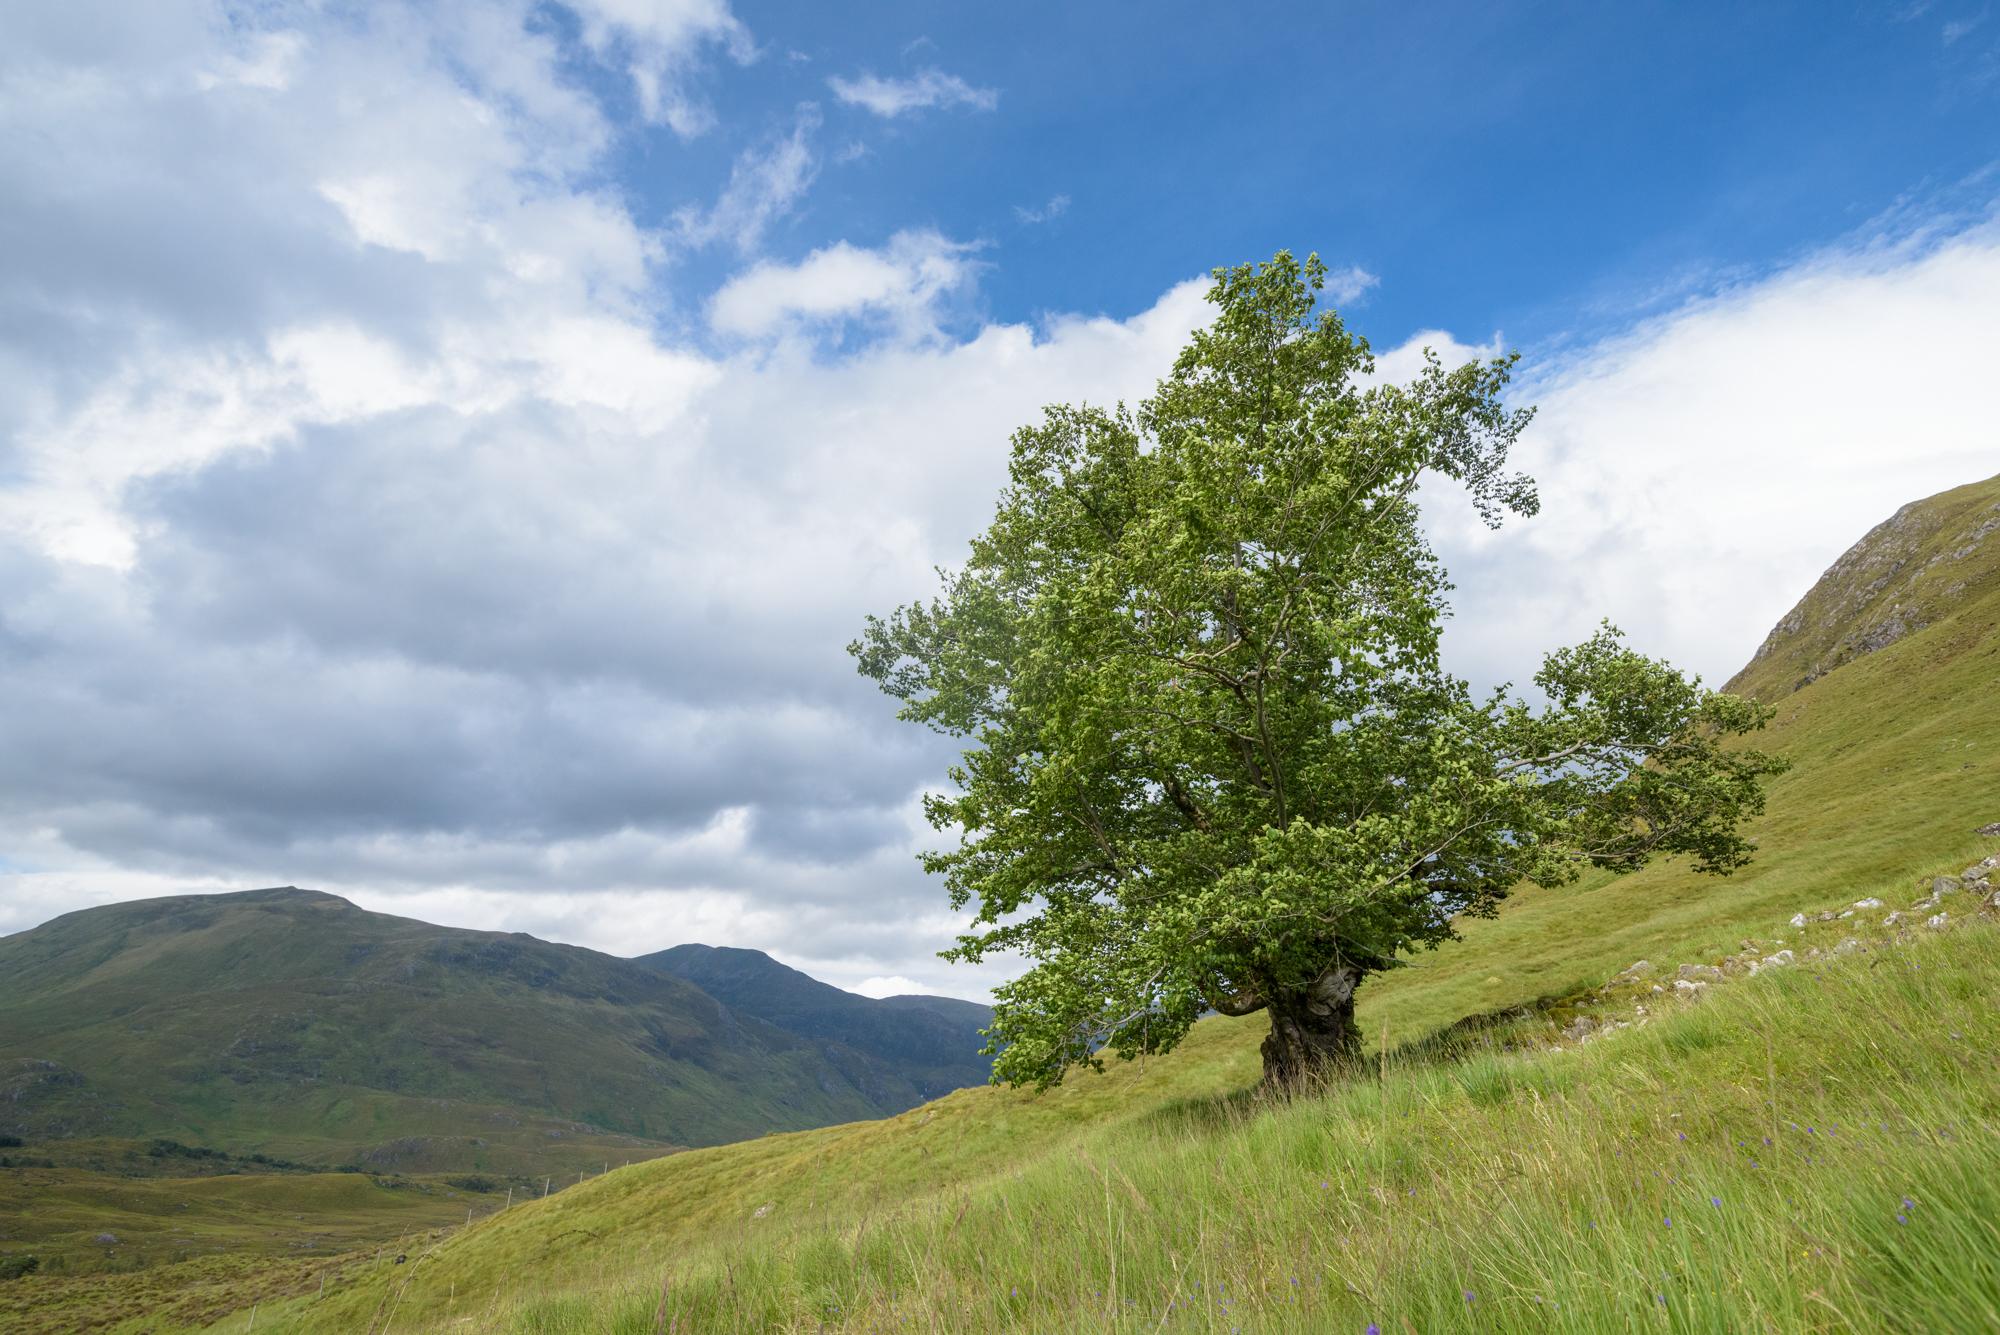 "The Last Ent of Affric", in Glen Affric has been named as Scotland's Tree of the Year for 2019